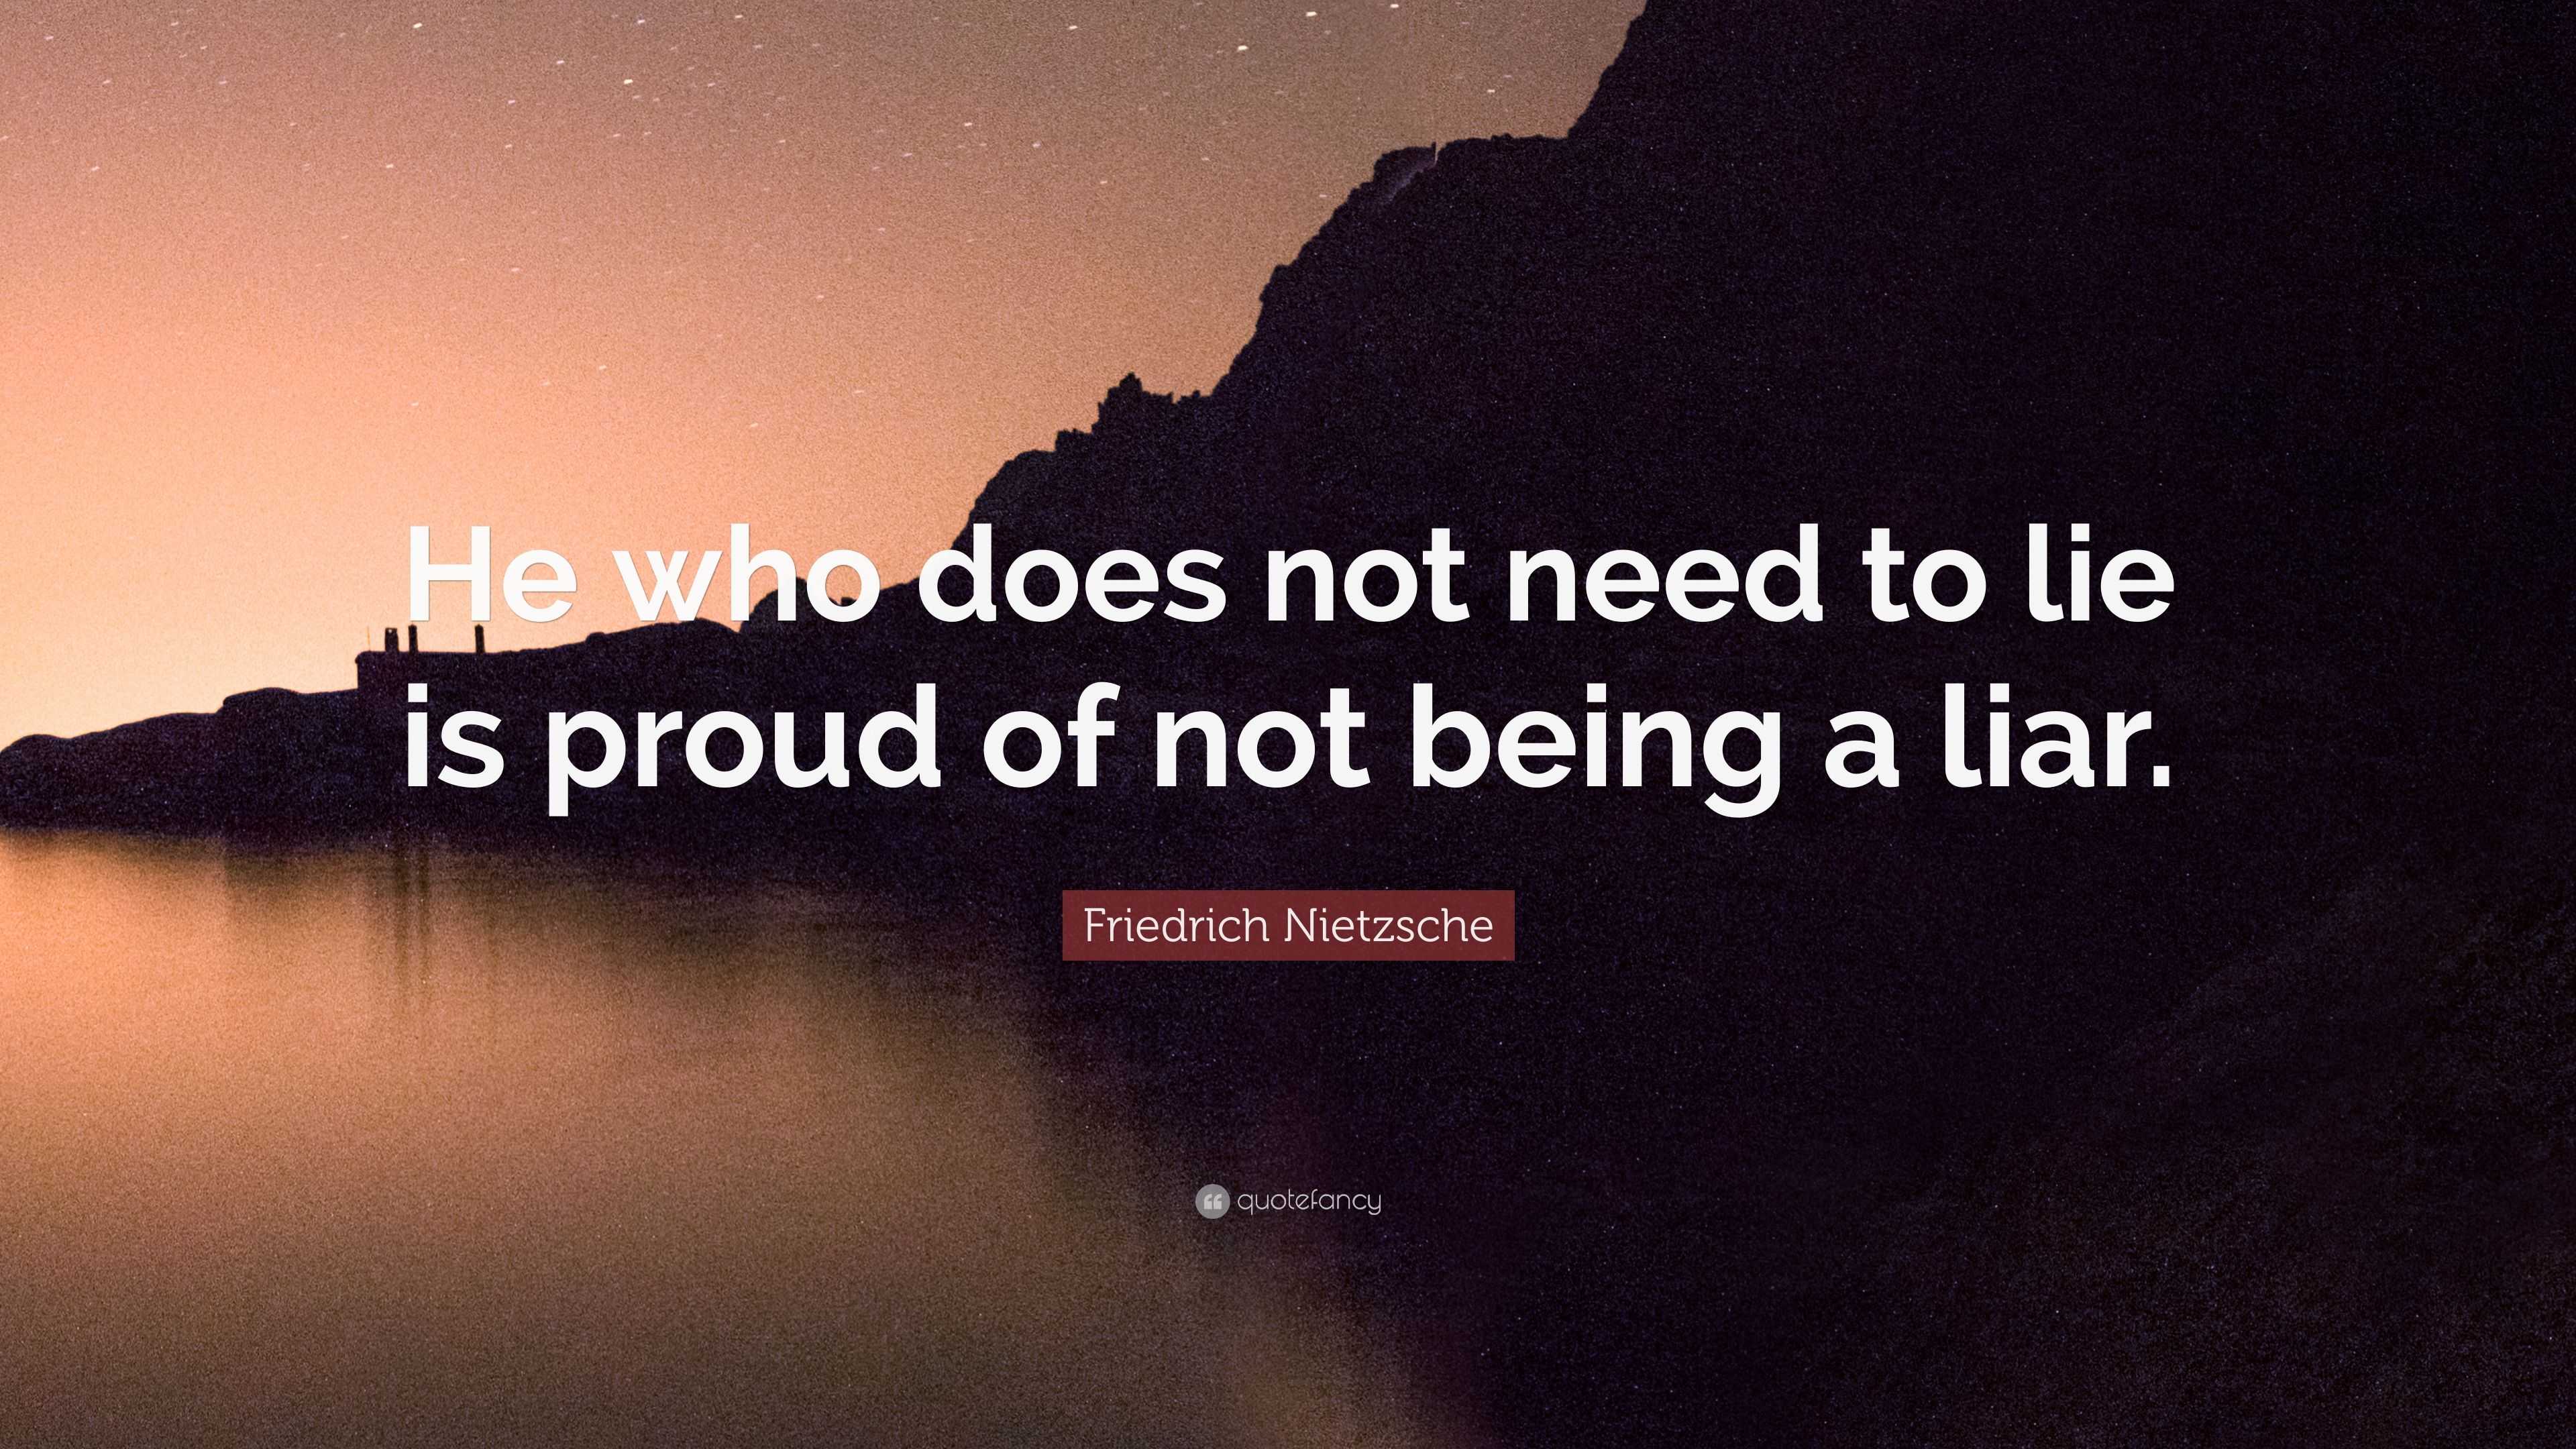 Friedrich Nietzsche Quote: “He who does not need to lie is proud of not ...